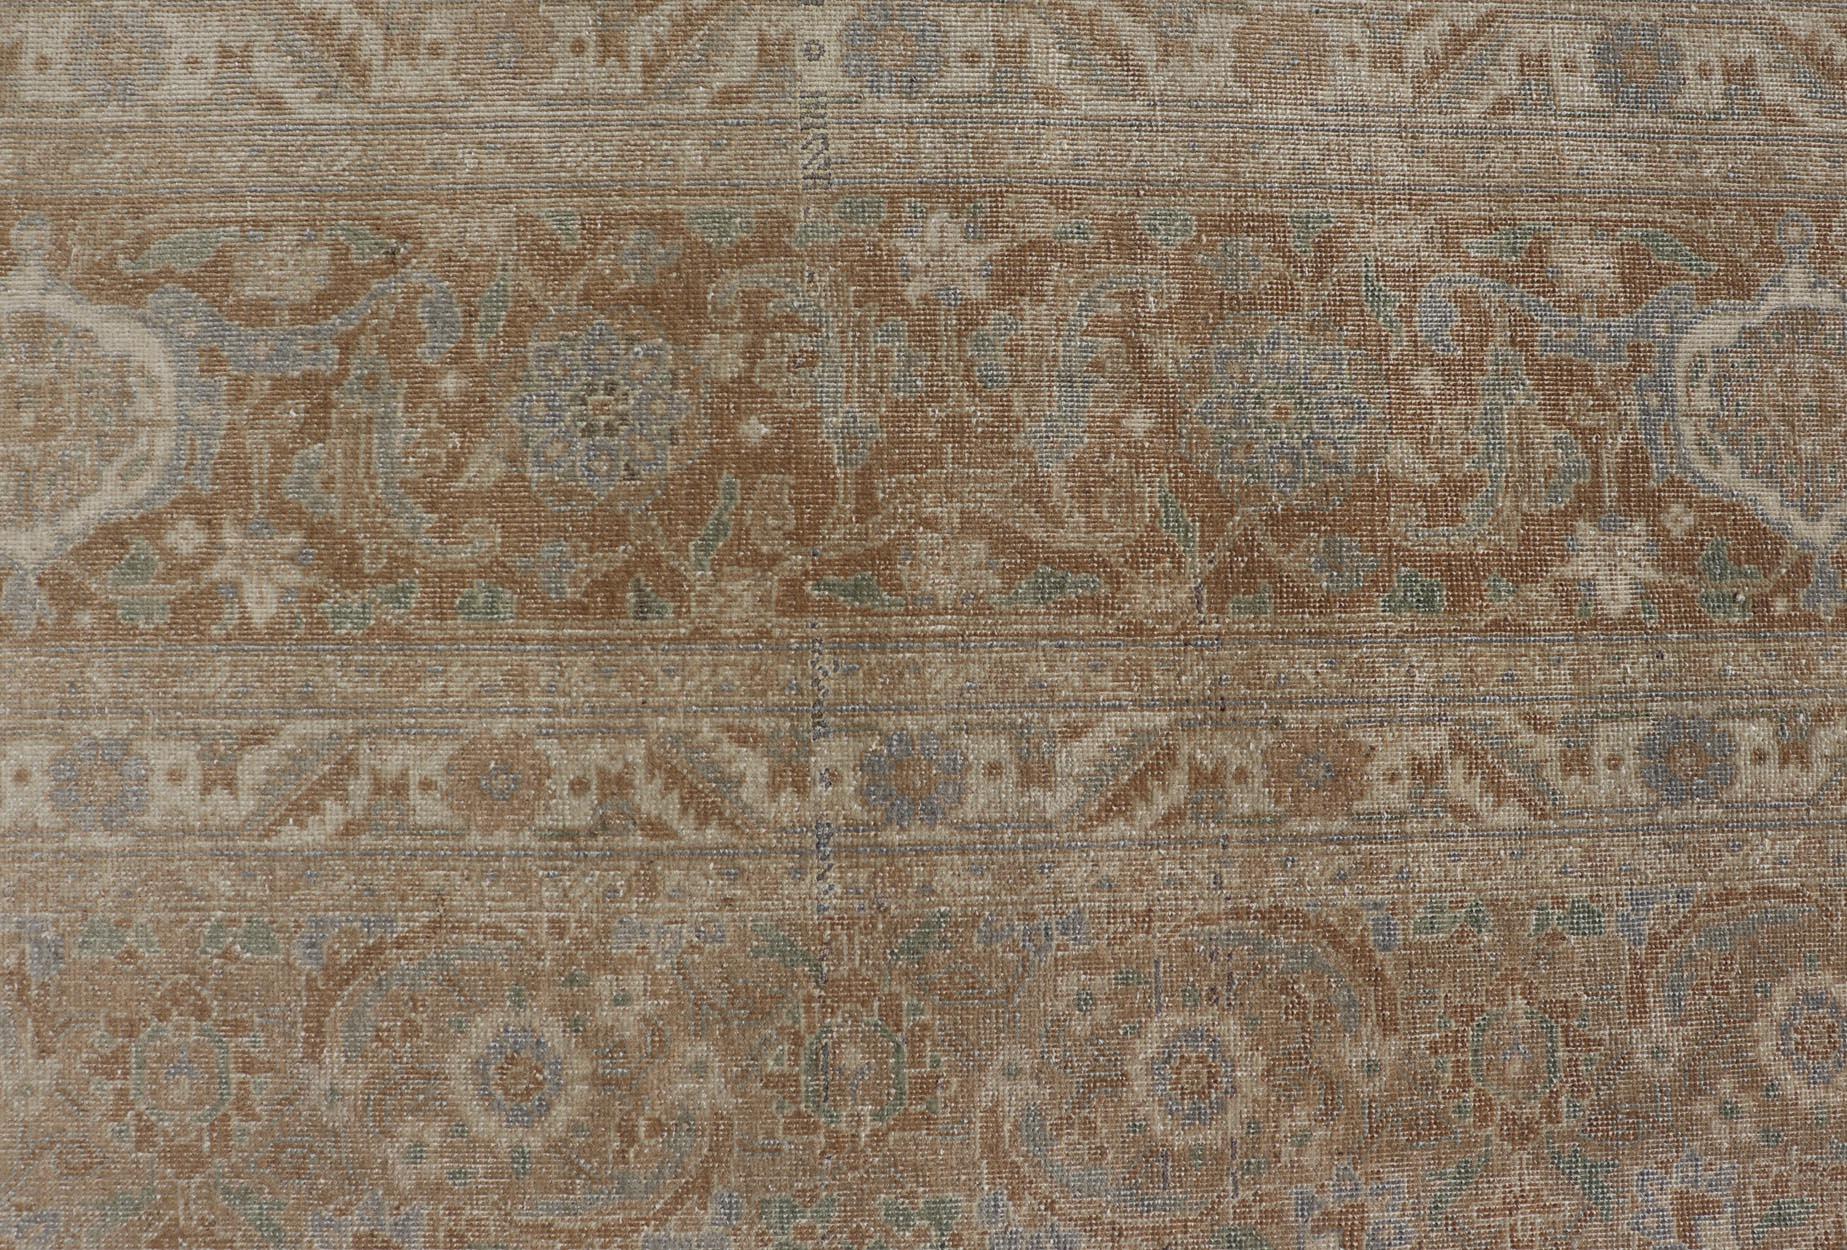 Antique Persian Tabriz Rug in Wool with All-Over Floral Design in Earth Colors In Good Condition For Sale In Atlanta, GA